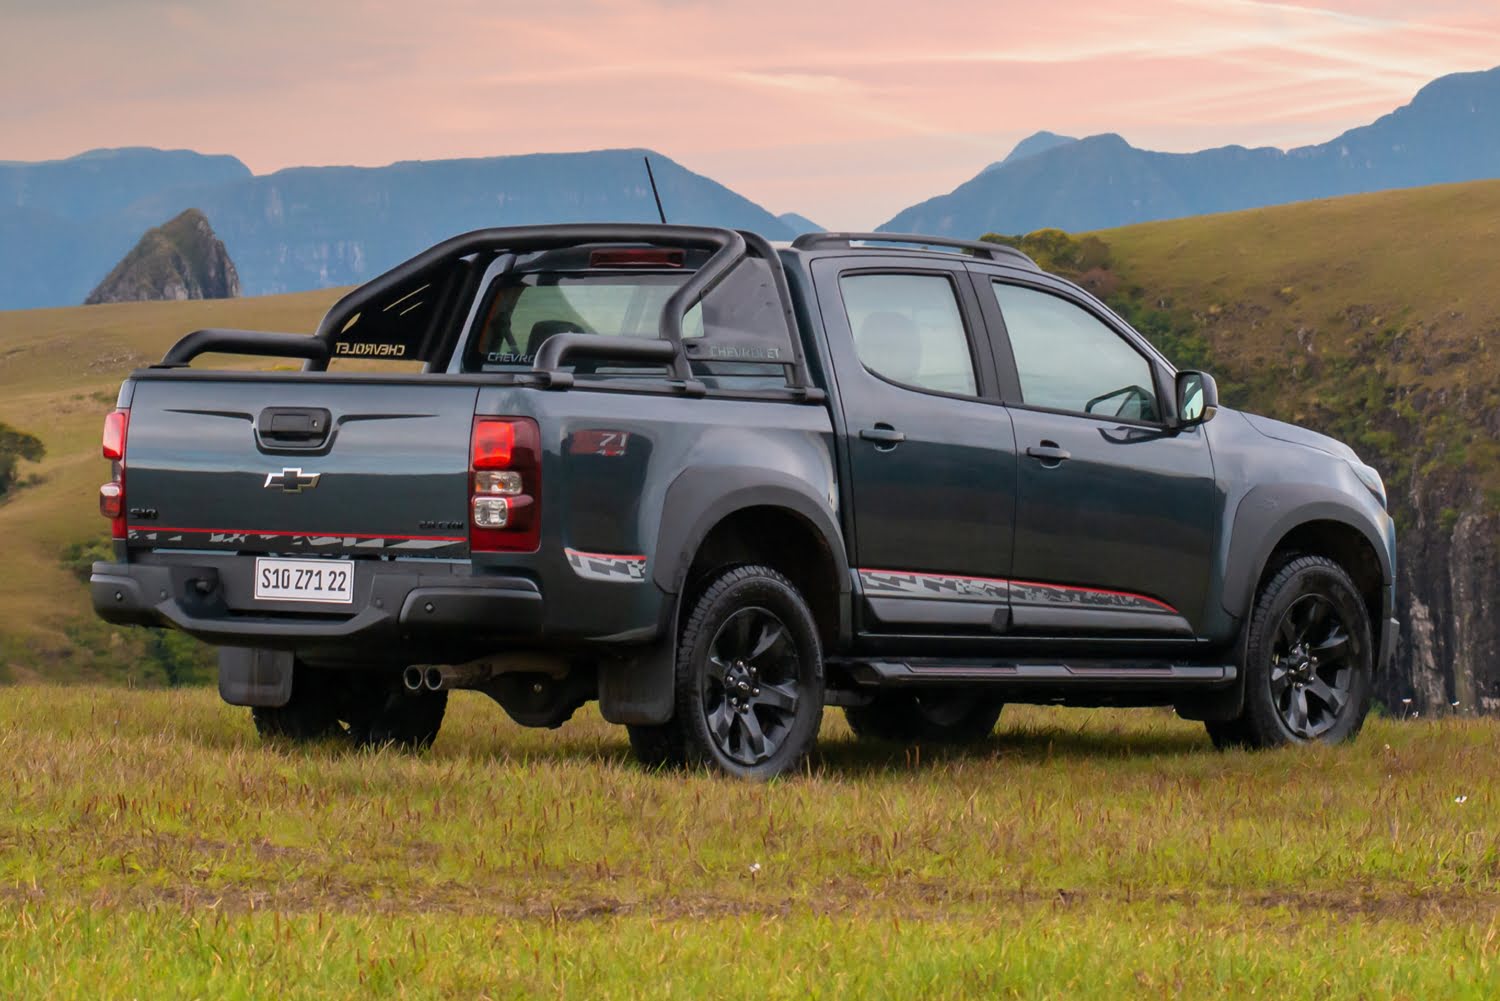 New 2022 Chevy S10 Z71 Officially Launches In Brazil